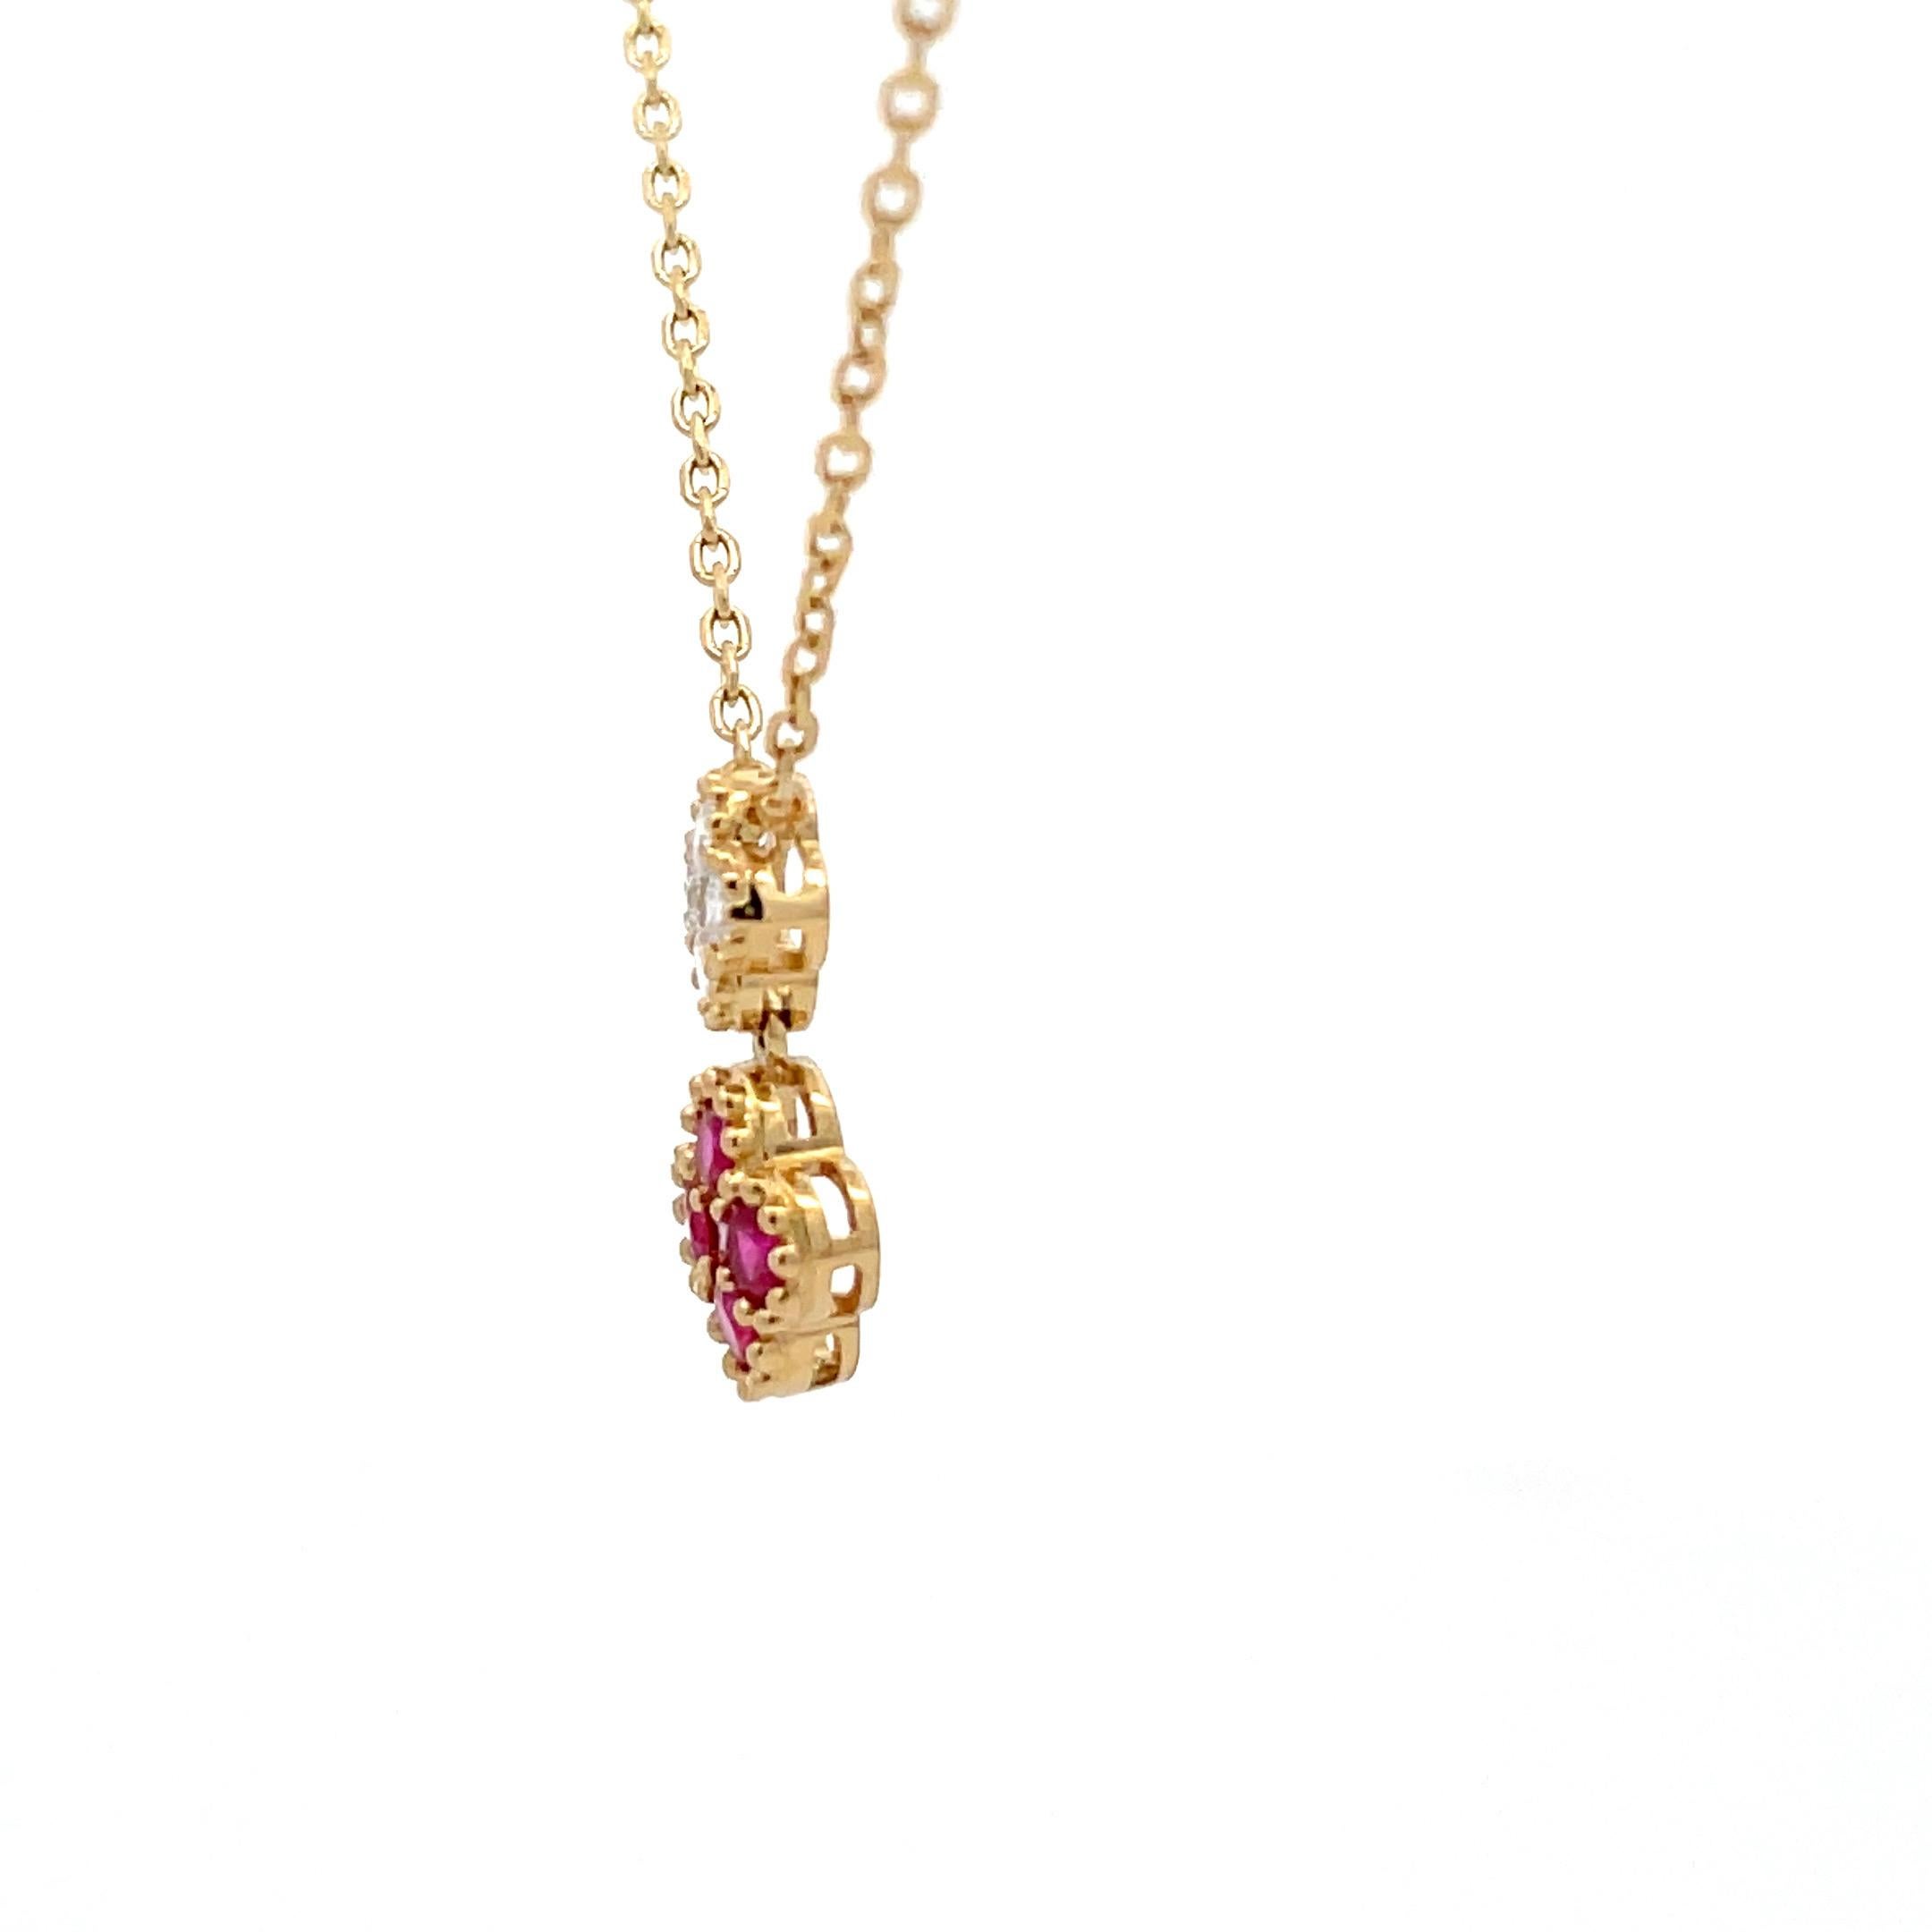 18 Karat yellow gold pendant featuring four round brilliants weighing 0.15 carats and 4 Rubies weighing 0.32 carats.

Chain ha 3 loops:
16